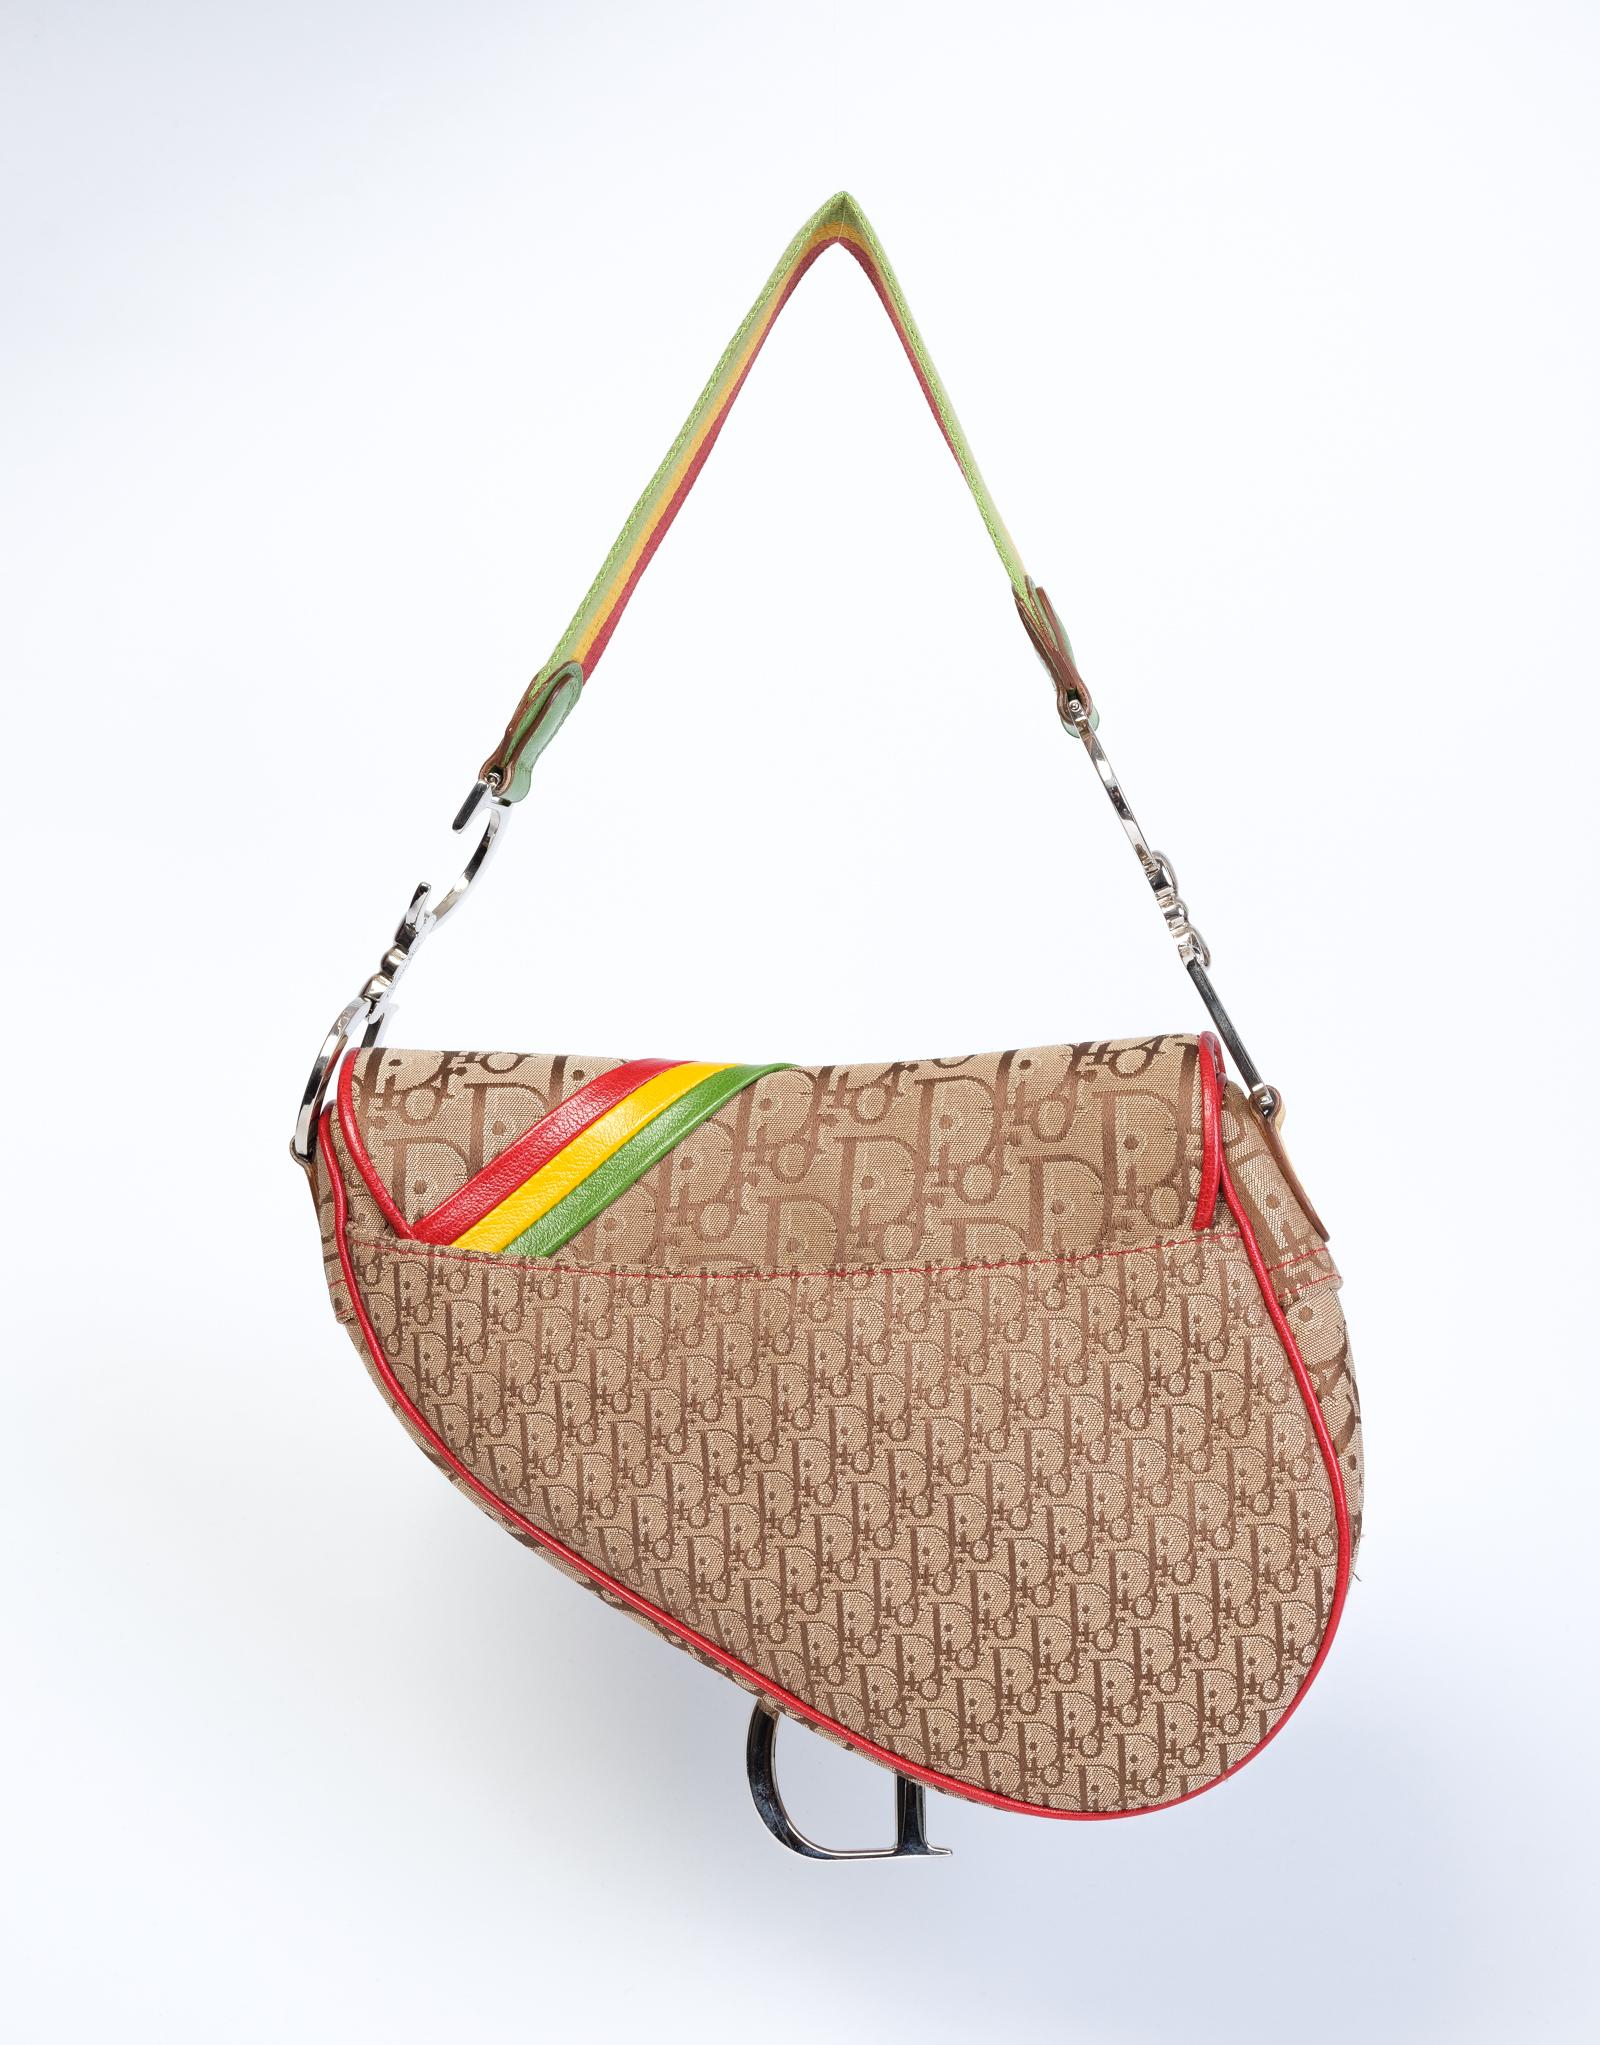 Designed by John Galliano in 2004 this saddle bag has a Jamaican-inspired design for the fall 2004 Rasta collection. The bag is made with canvas with Diorissimo and oblique monogram prints.
The bag features a green, yellow and red leather shoulder